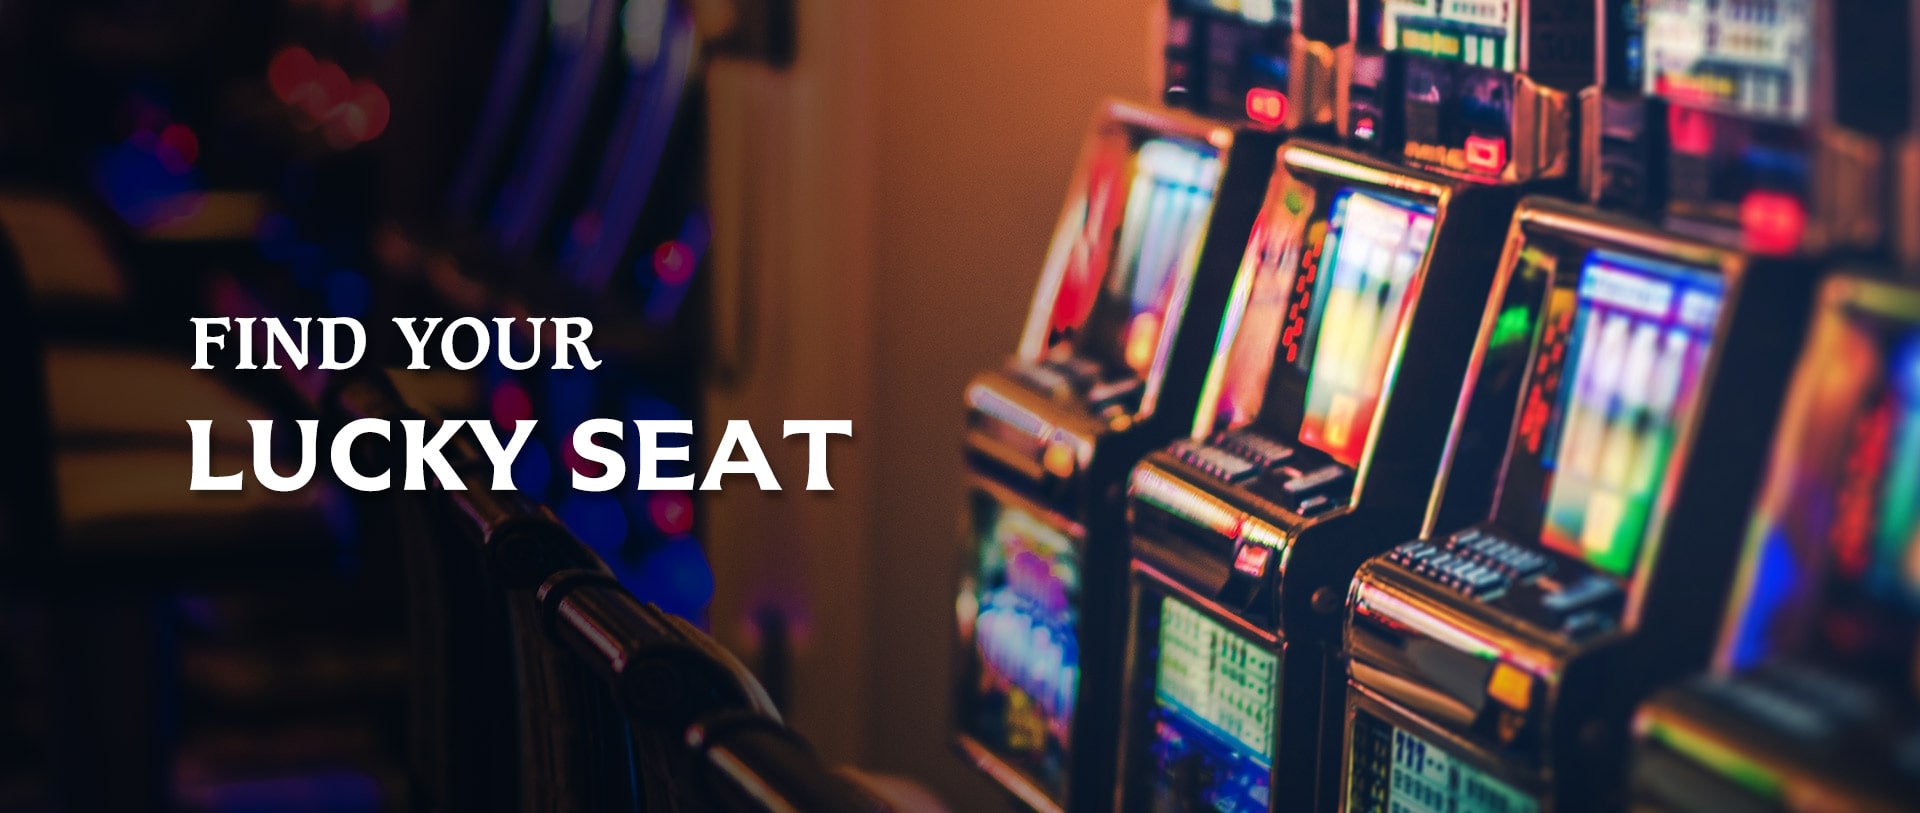 Find Your Lucky Seat - Slot Machines